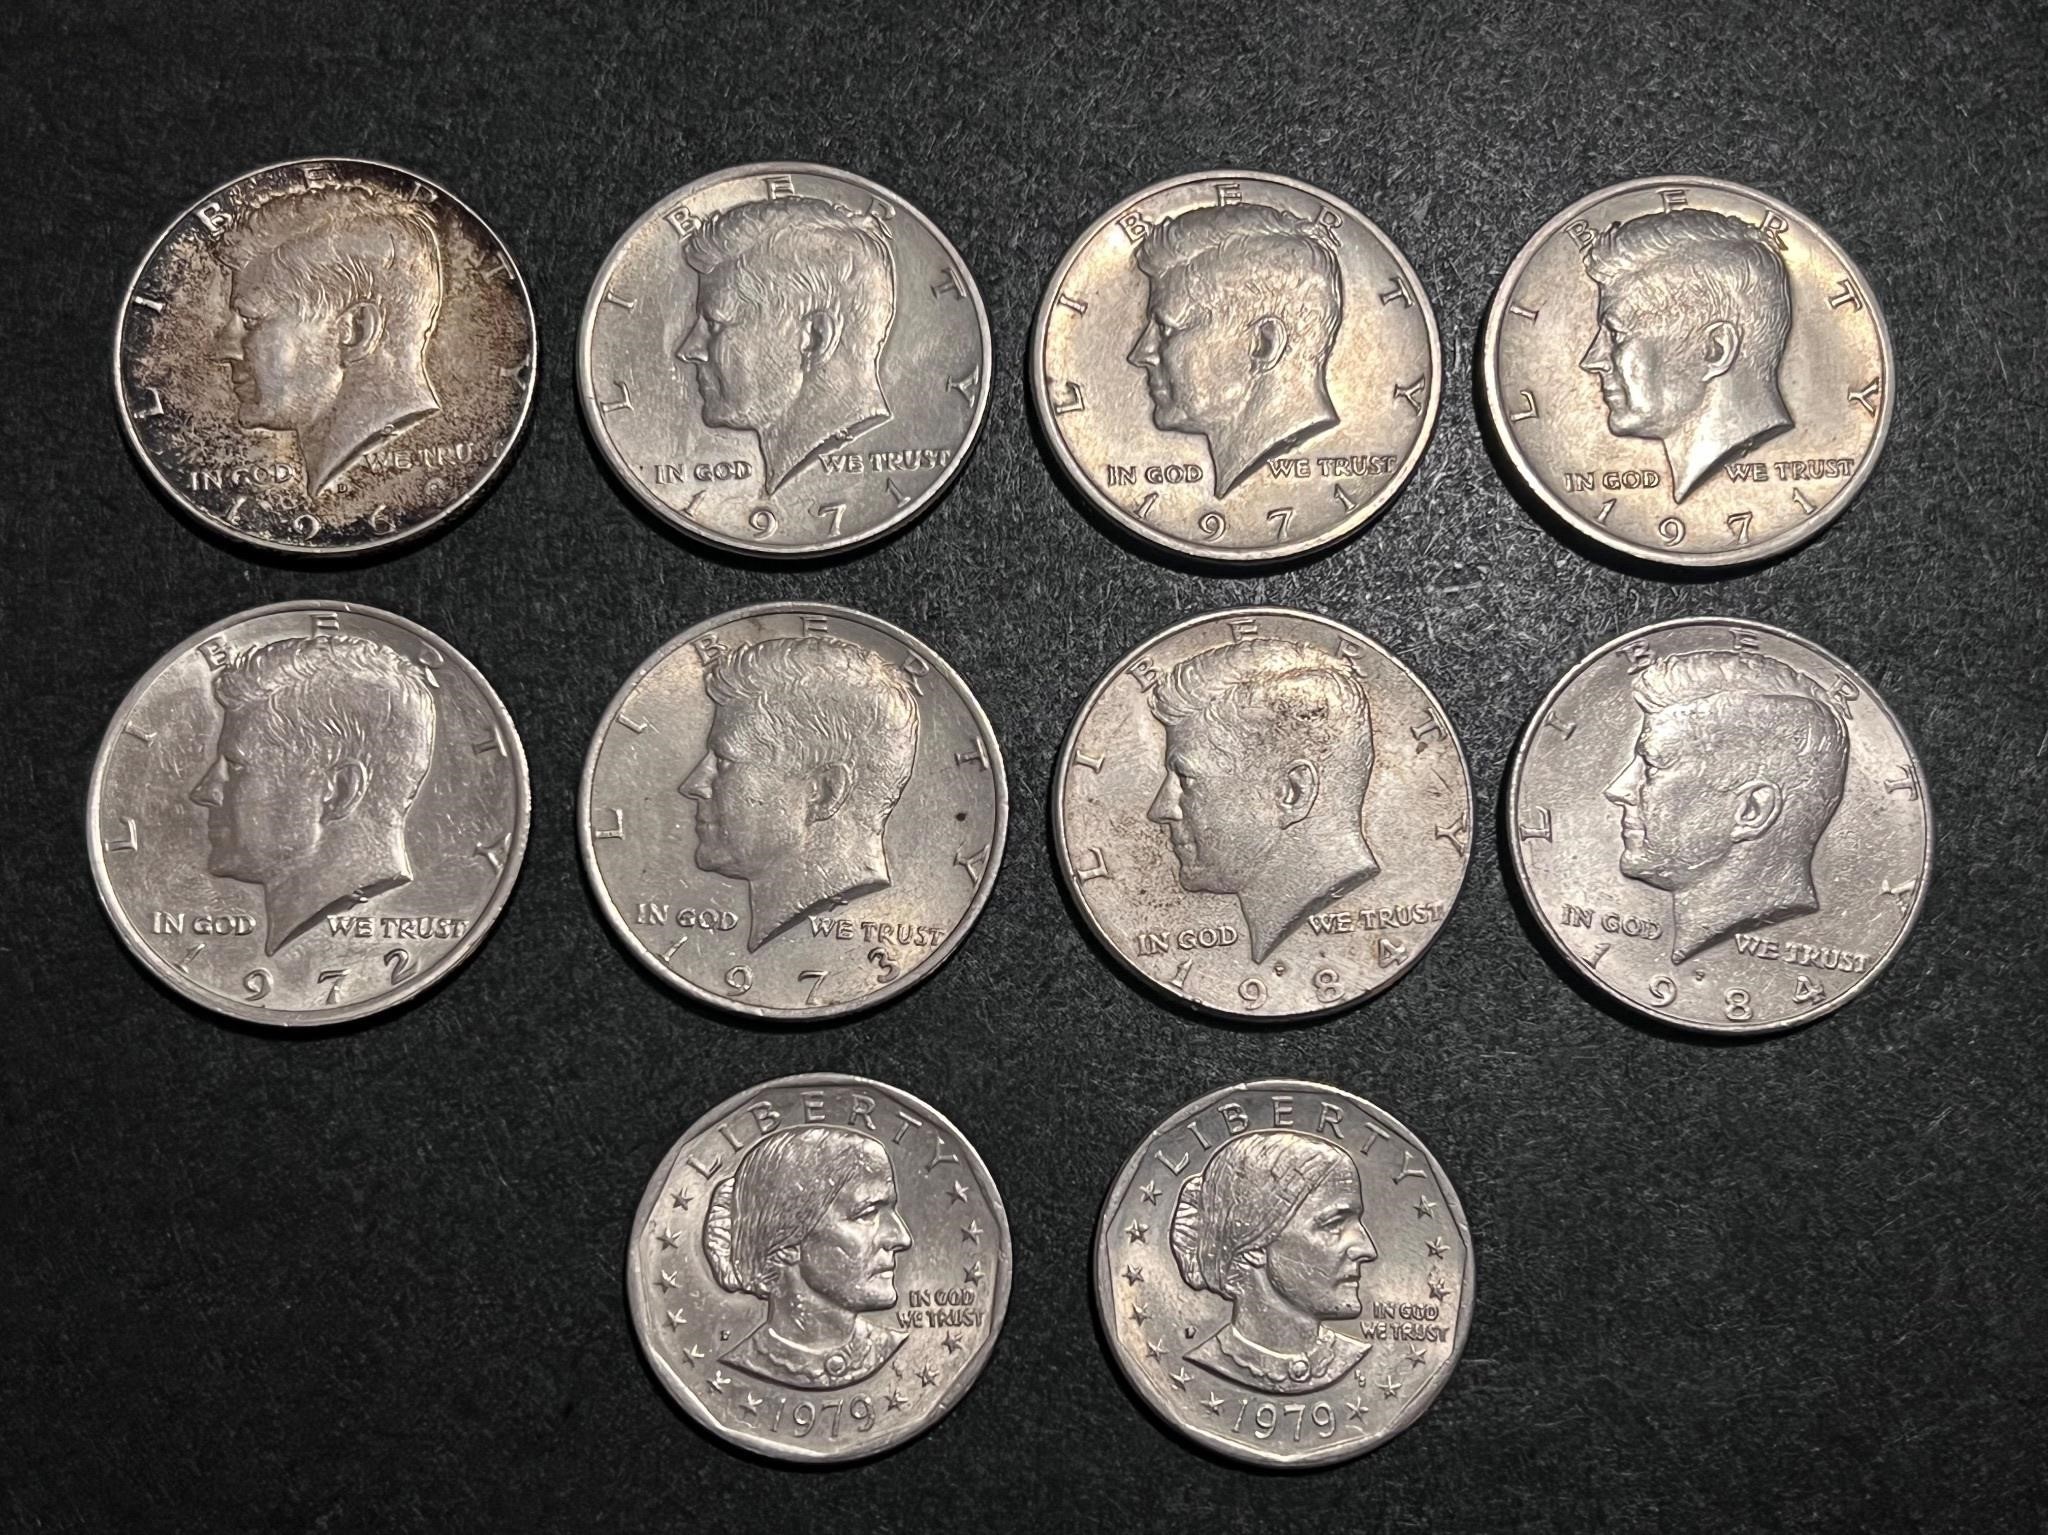 Lot of 10 coins, 8 half dollars & 2 one dollar coi